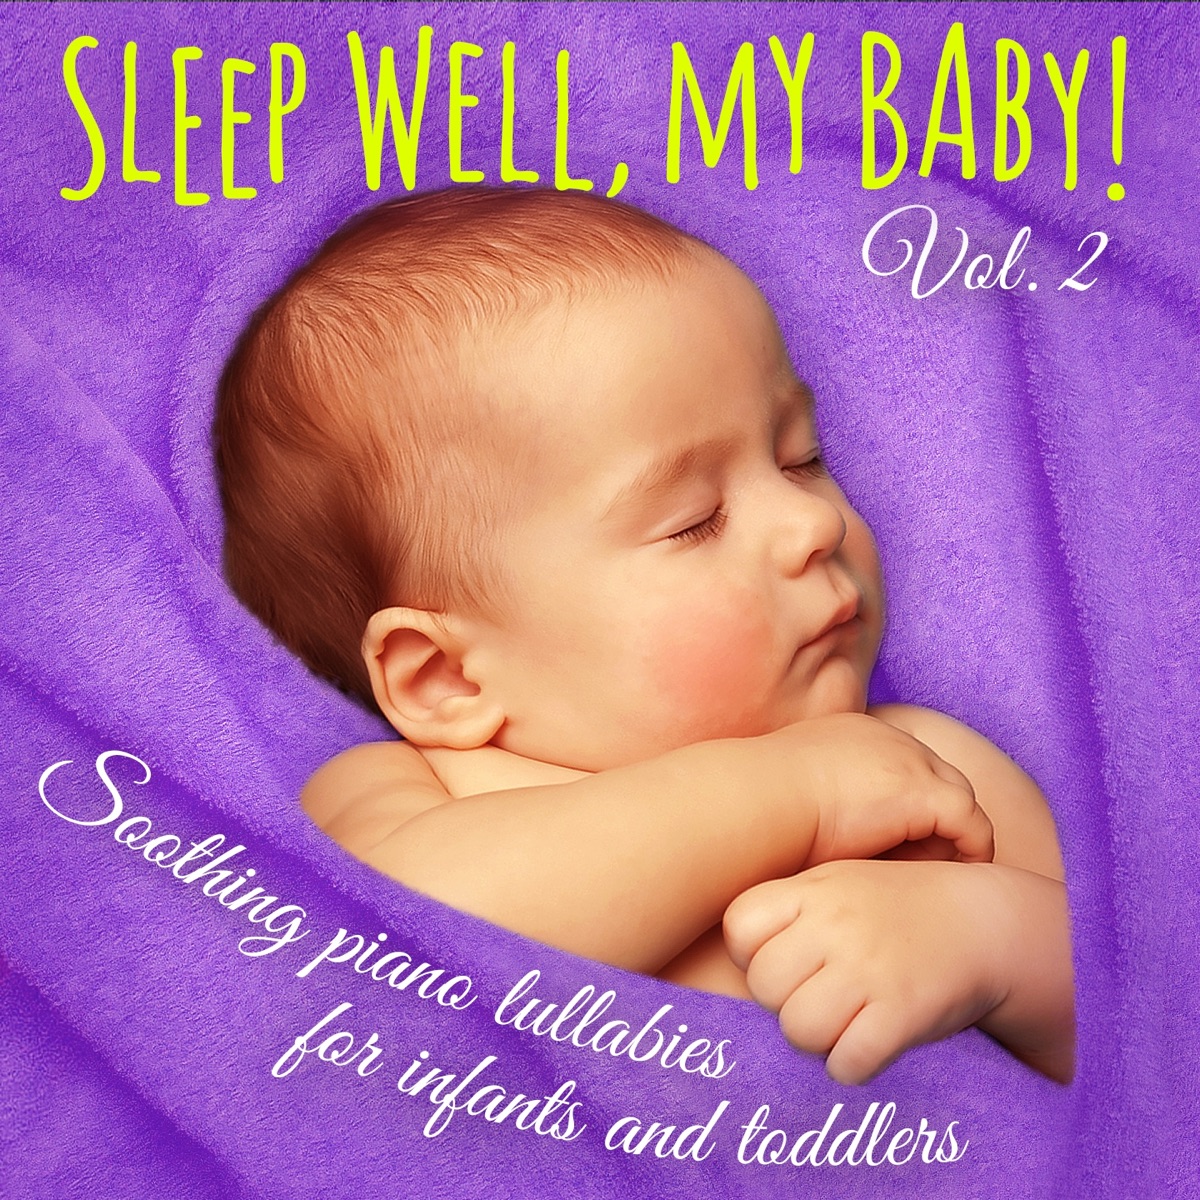 Sleep Well, My Baby! Vol. 2 (Soothing Piano Lullabies for Falling Asleep,  Dreaming, and Relaxing for Newborns, Infants, and Toddlers) by Martin Stock  on Apple Music